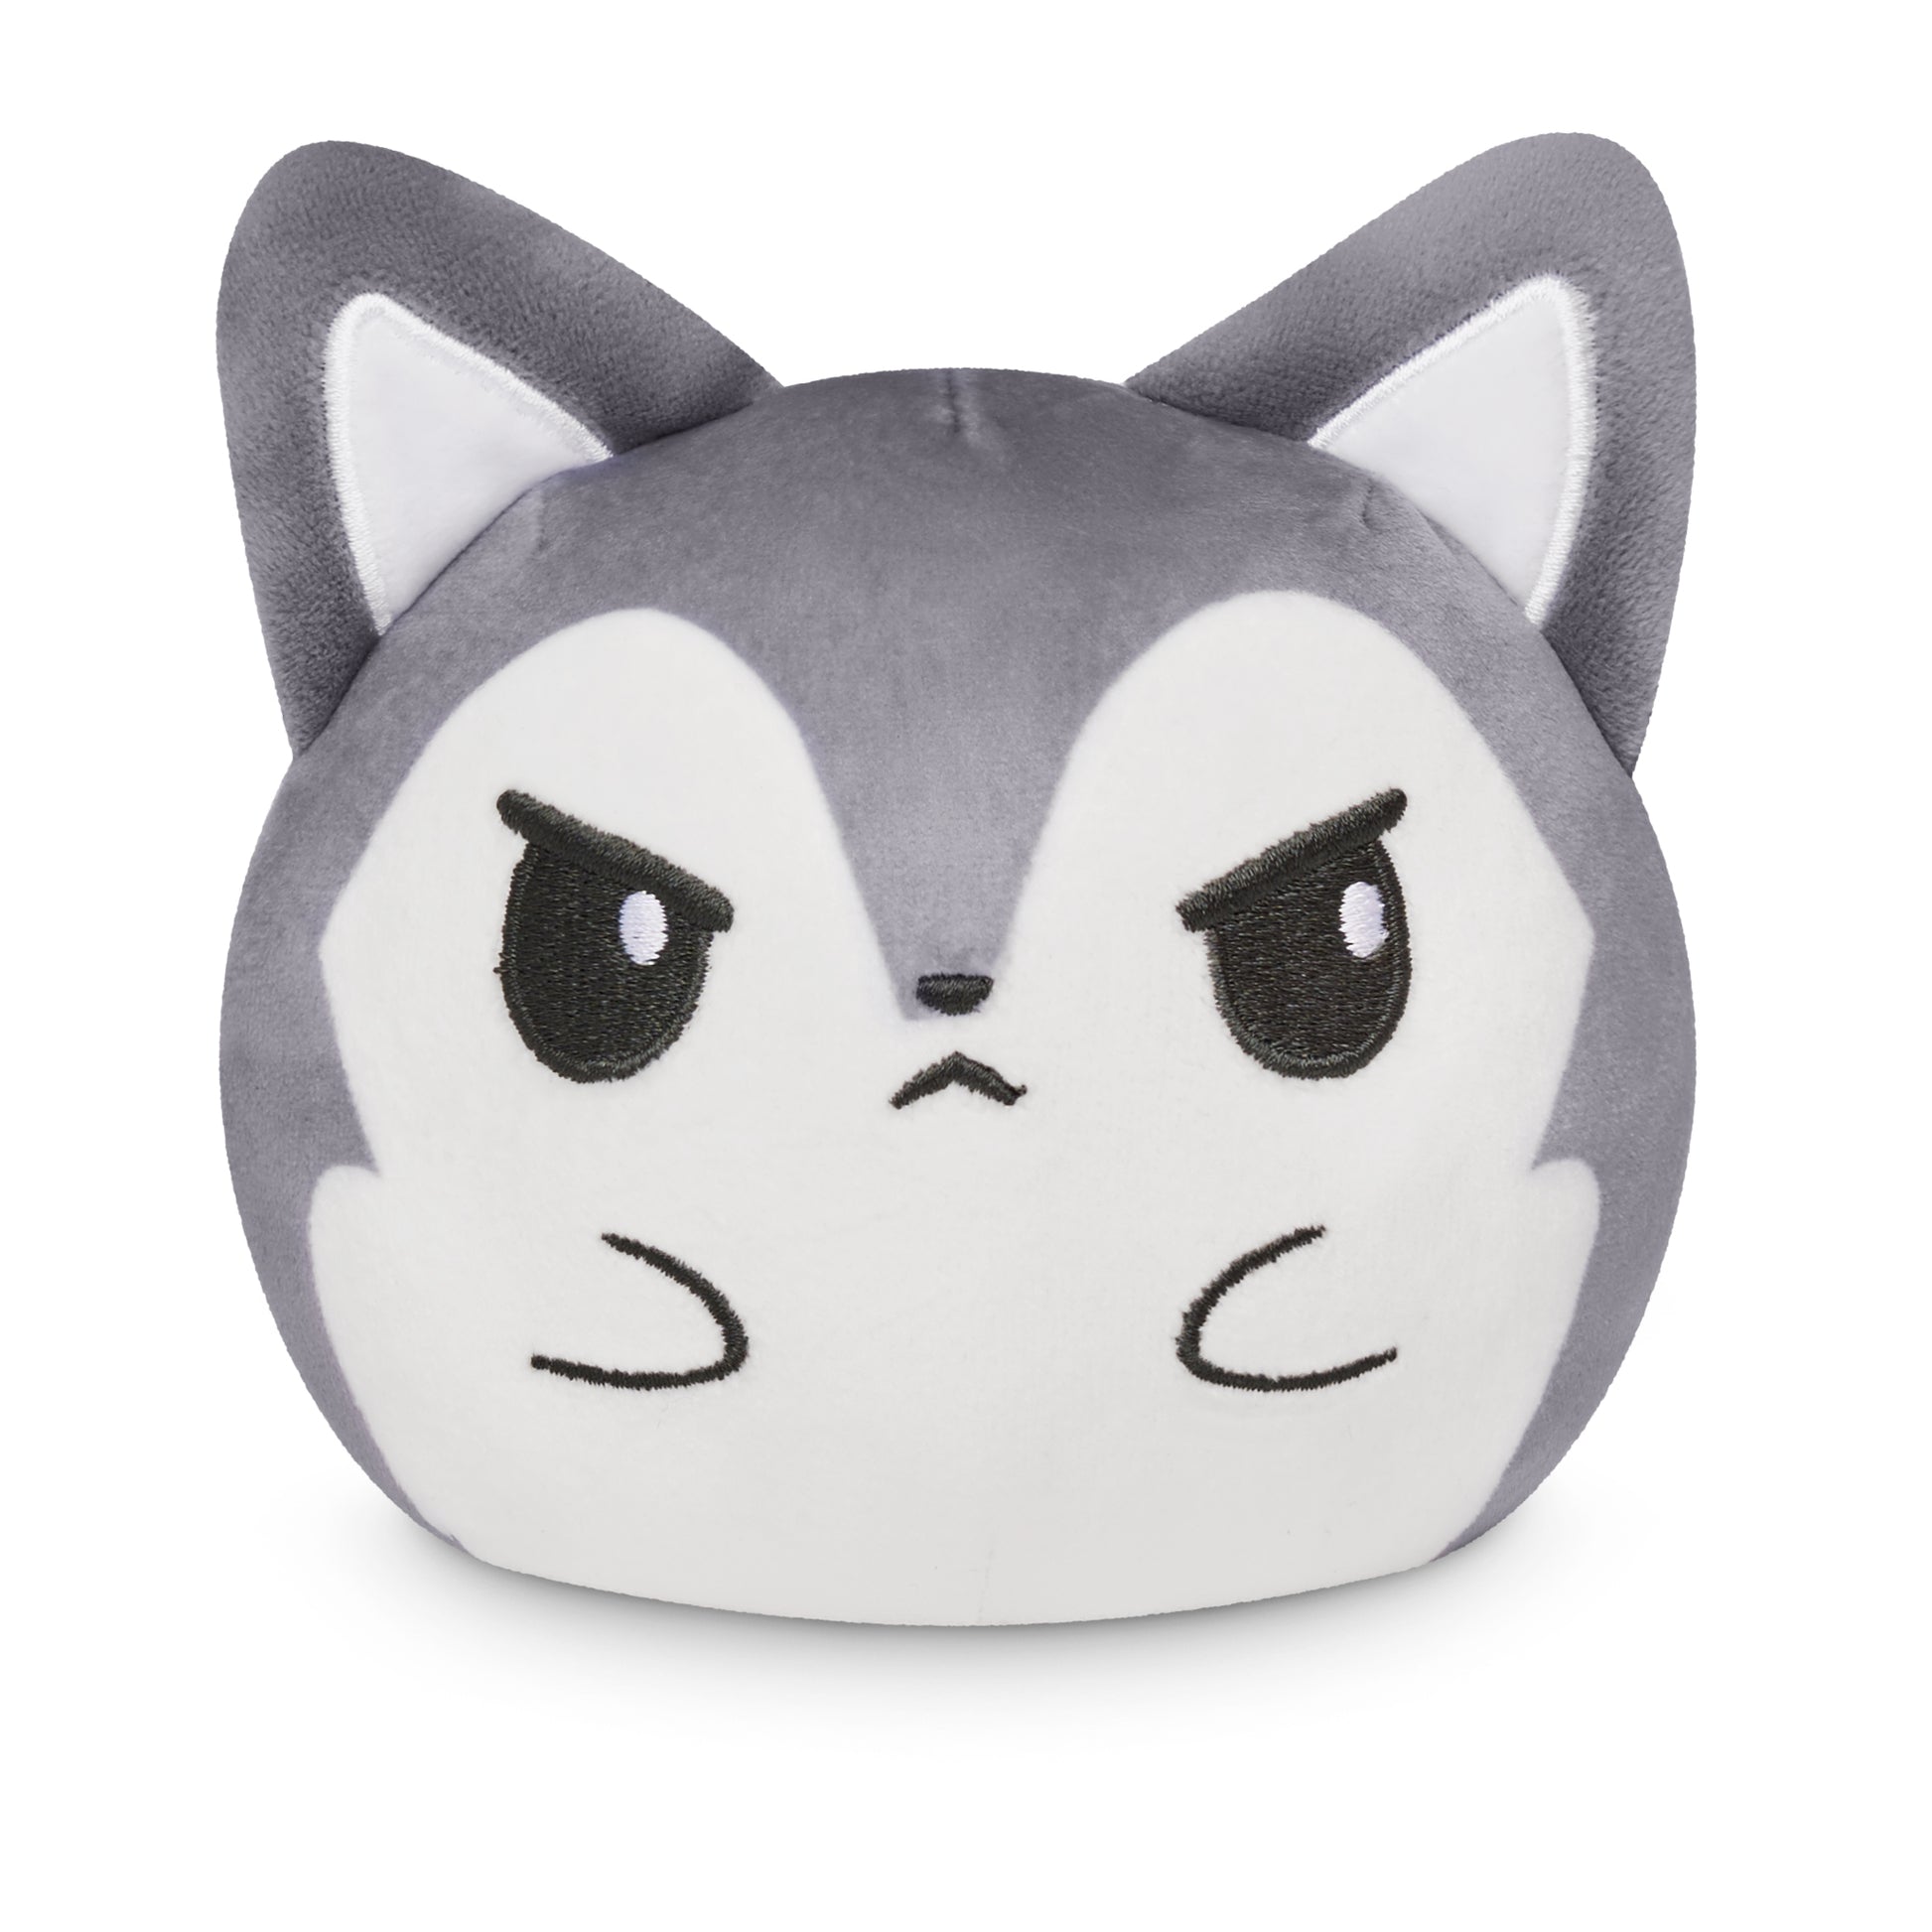 Plushiverse Fierce Wolf 4" Reversible Plushie with a reversible angry cat expression by TeeTurtle.